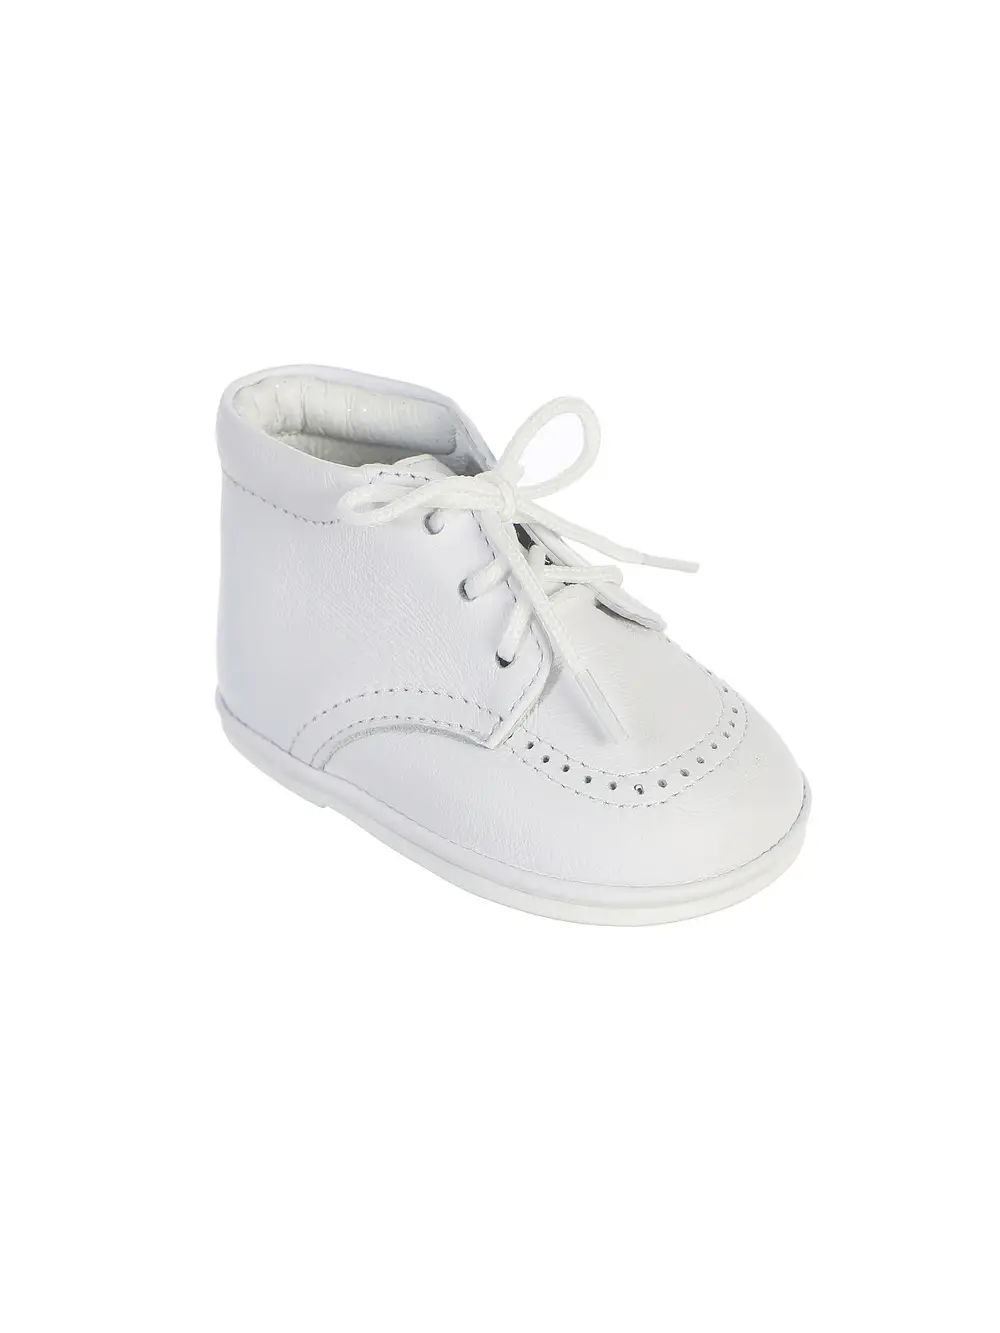 Charlie Leather Baby Shoe with lace